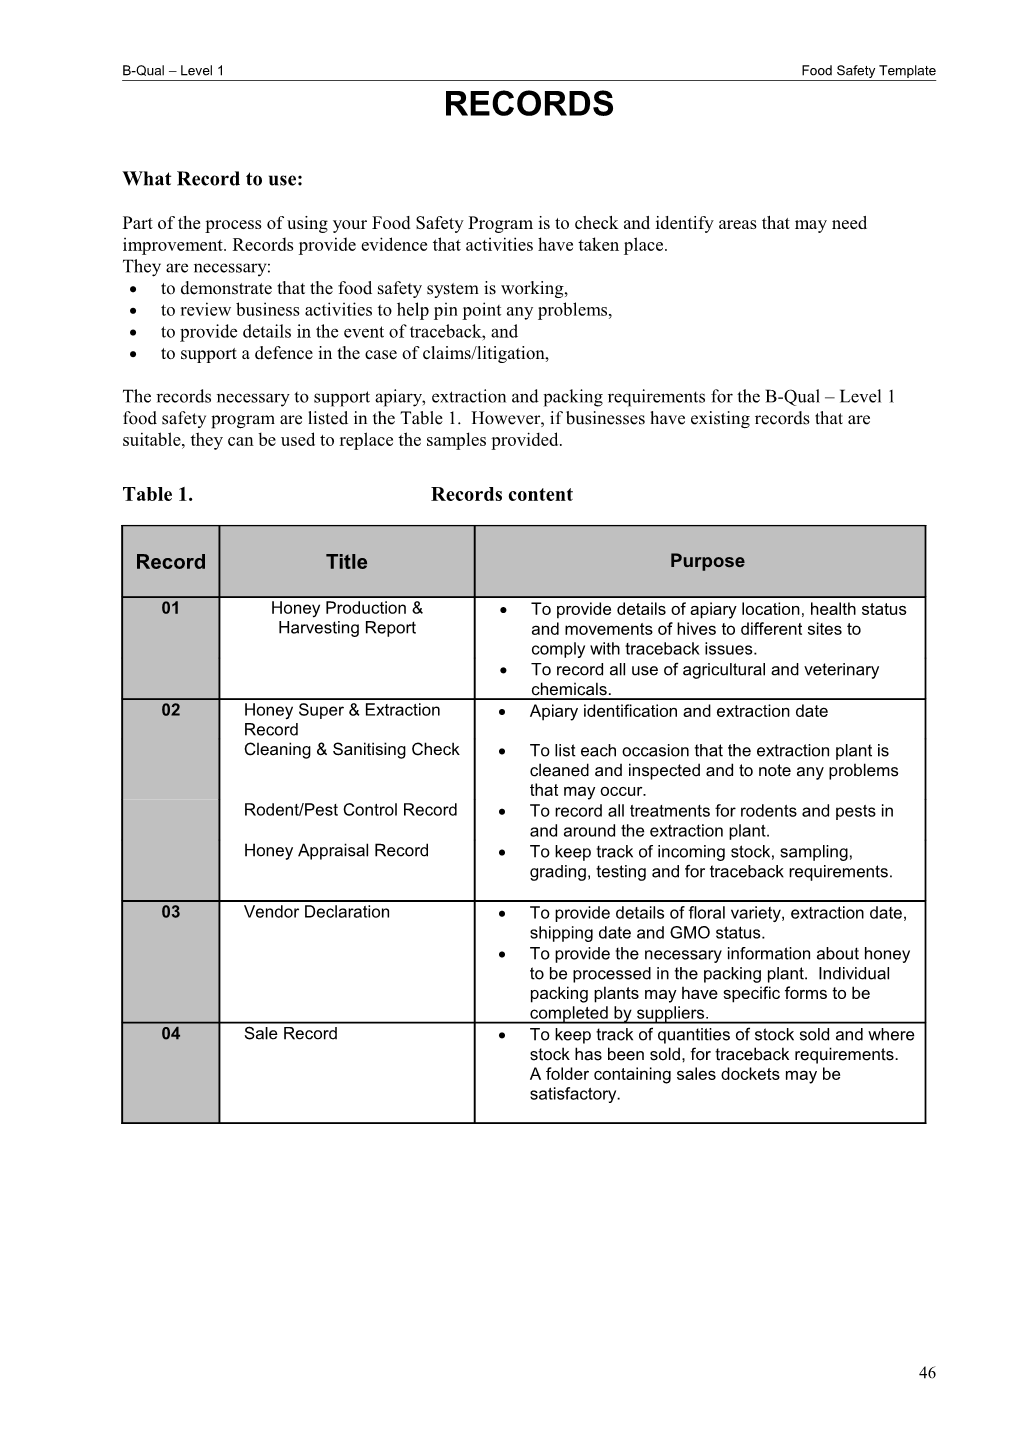 B-Qual Level 1Food Safety Template